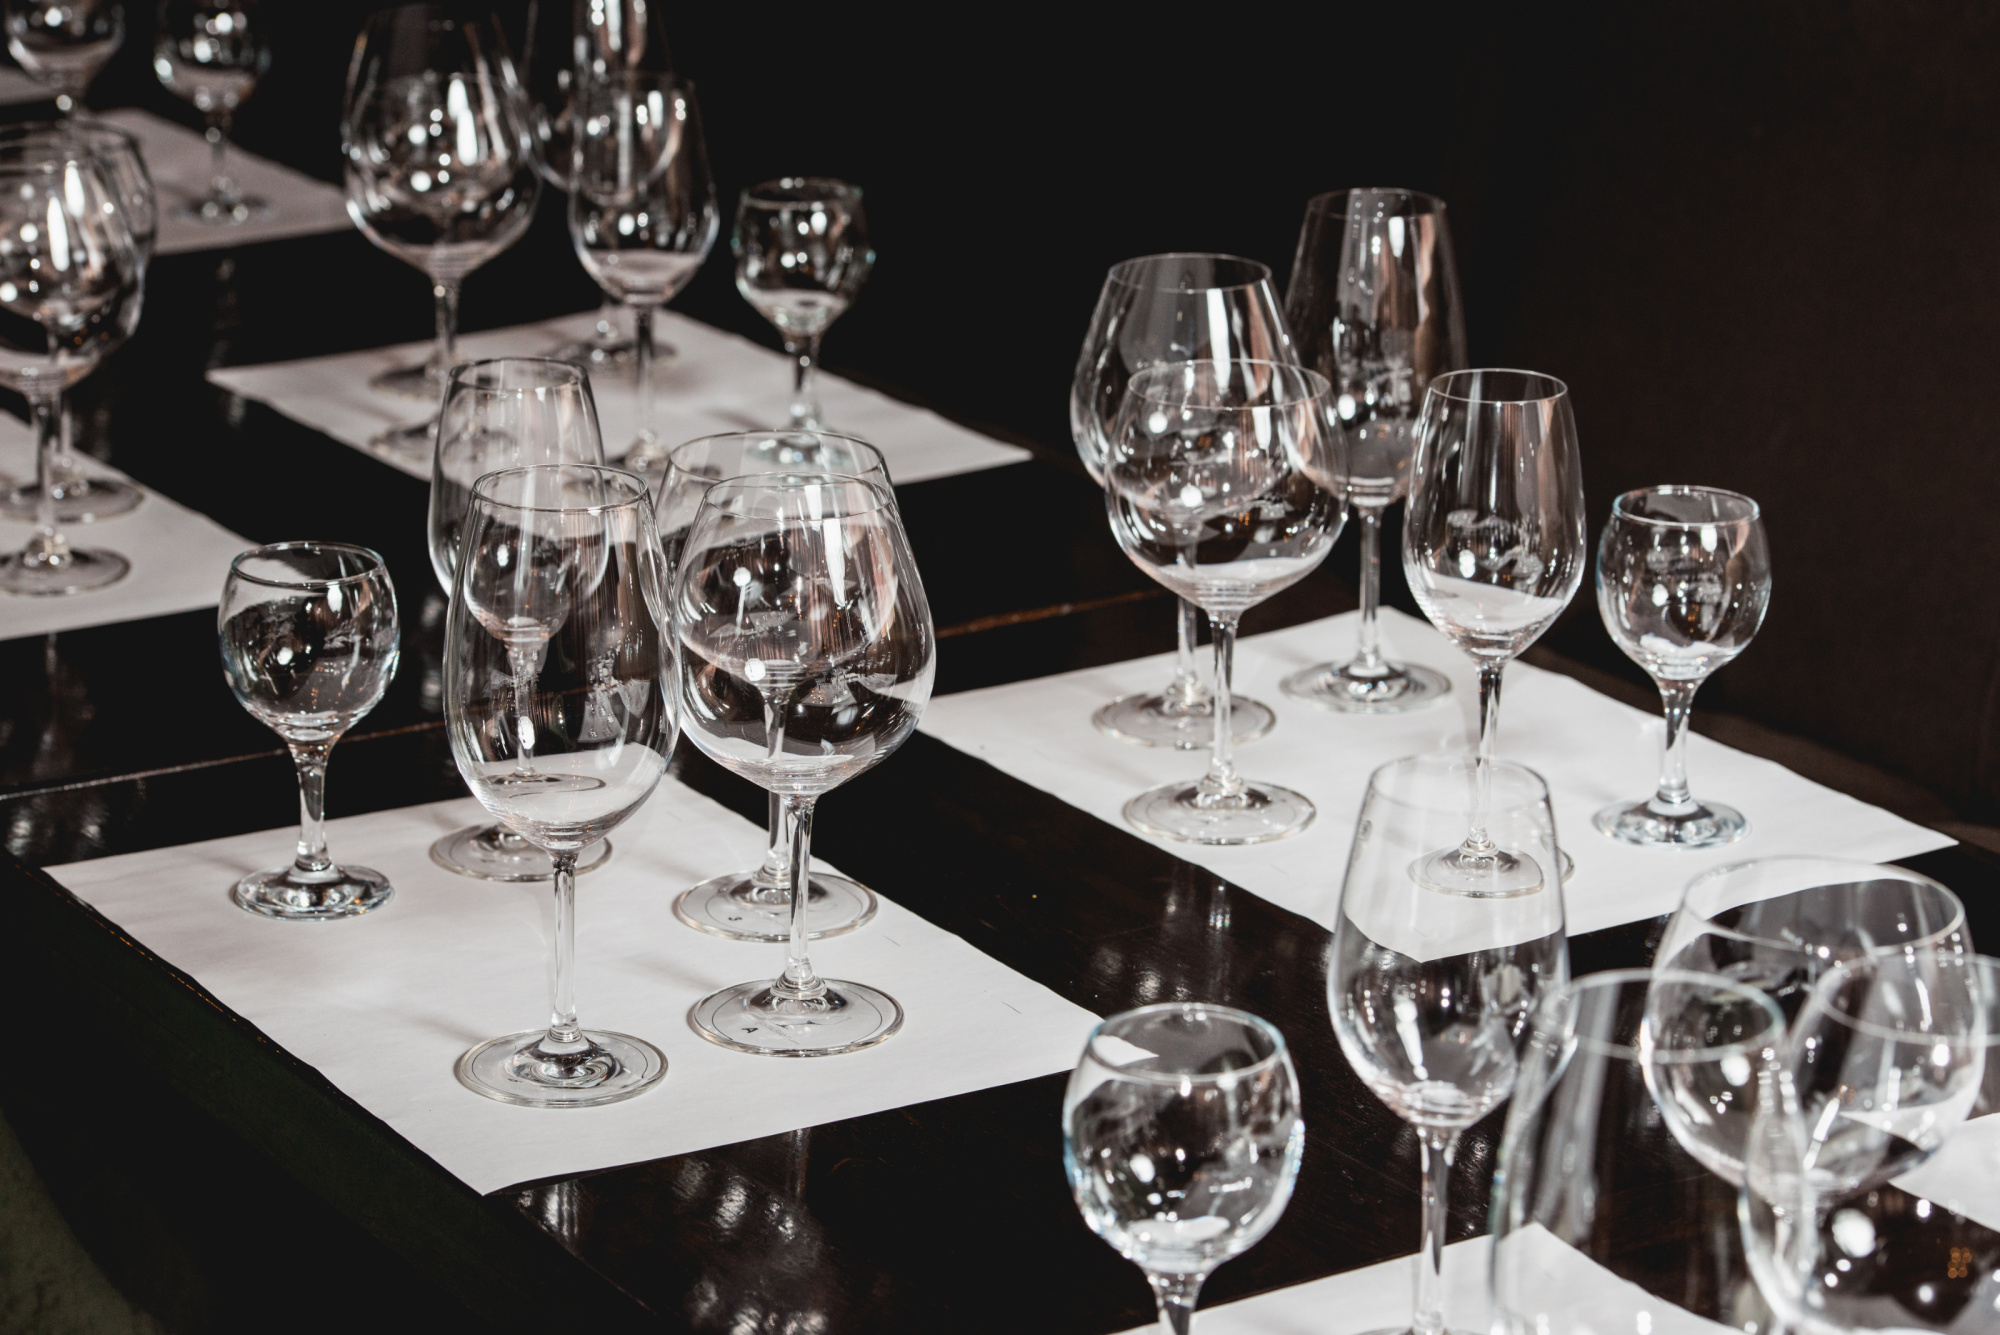 A group of wine glasses on a table.